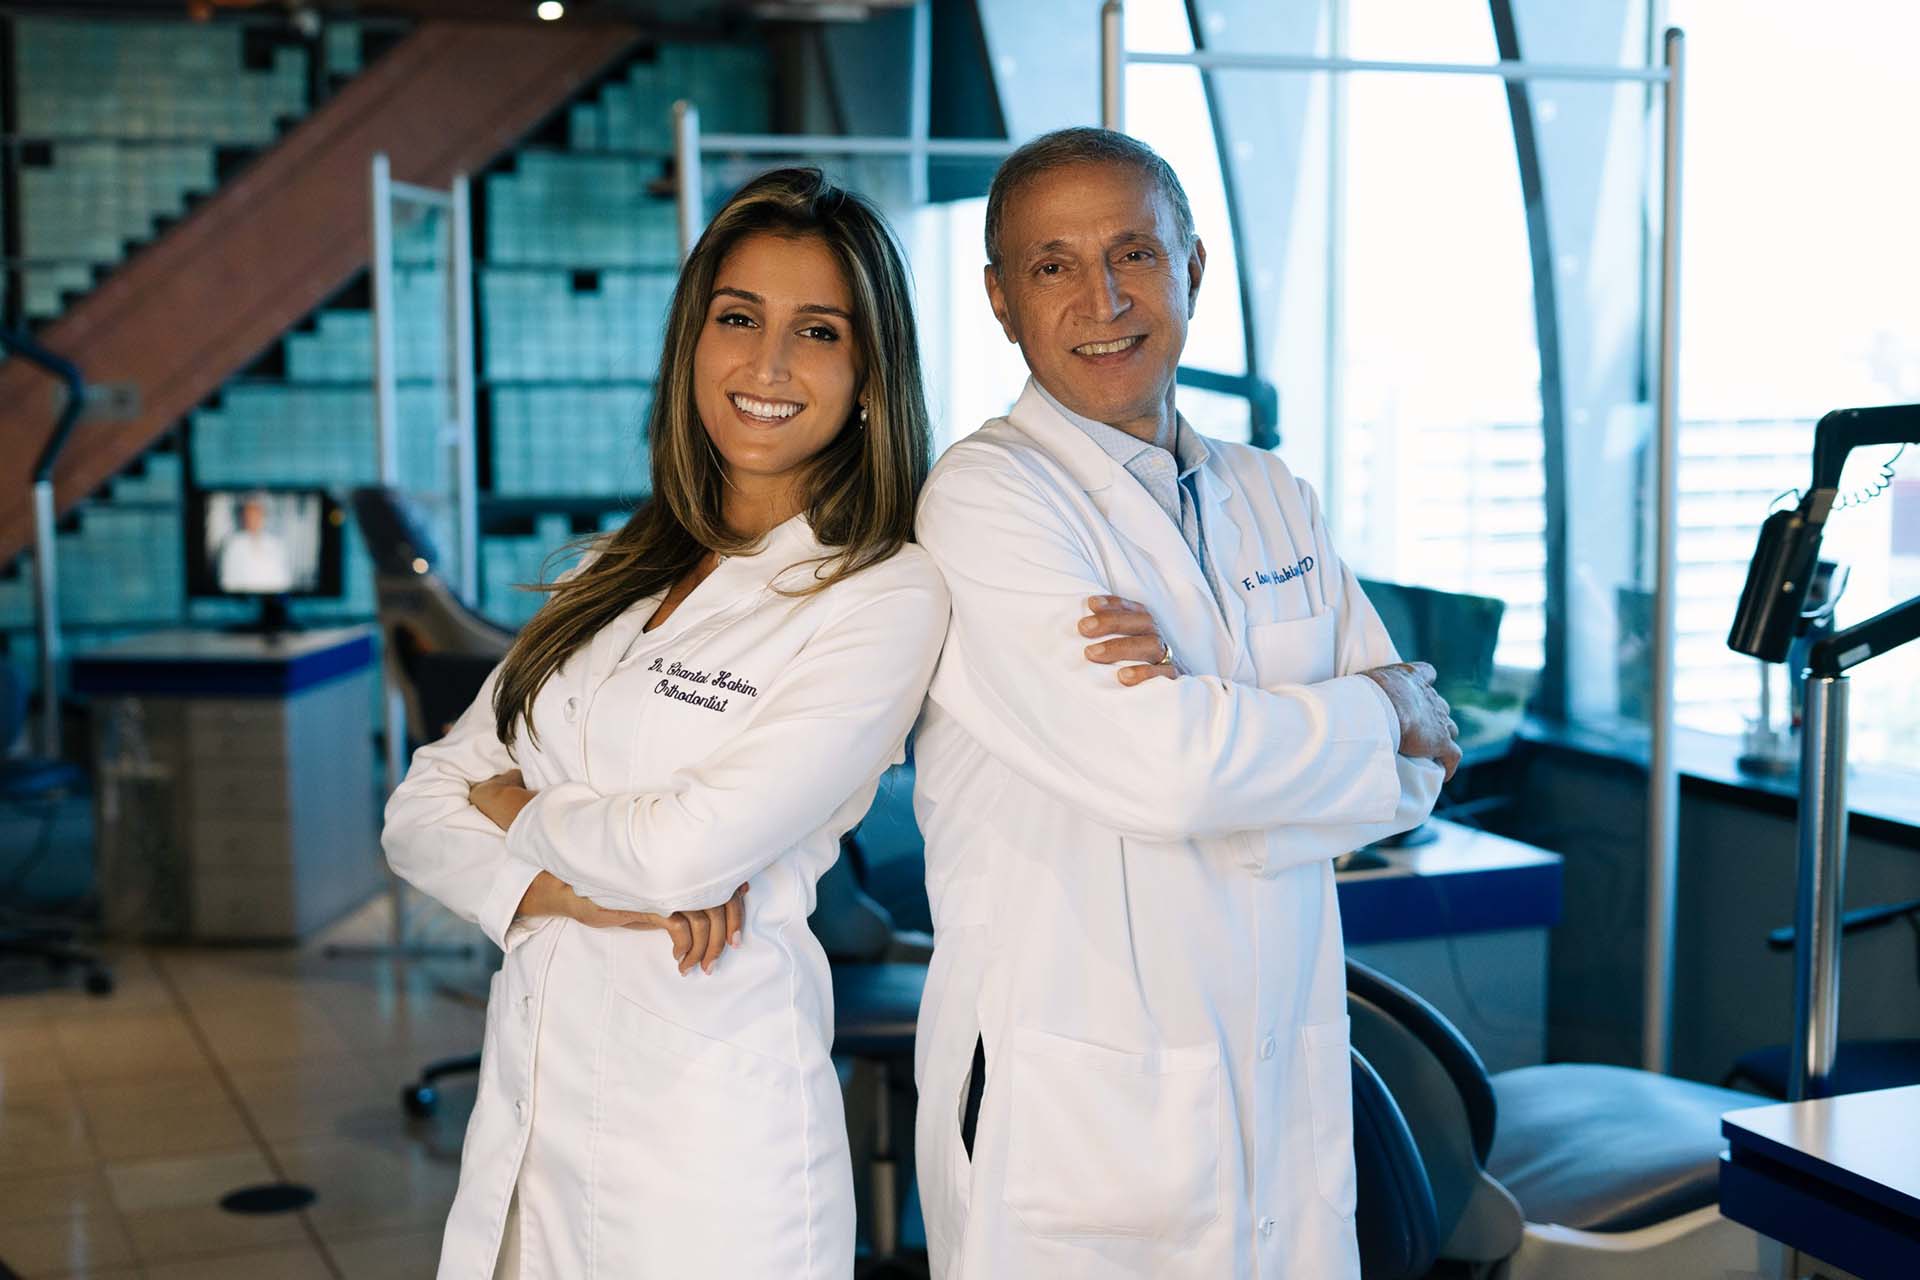 Dr. Chantal Hakim and Dr. F. Isaac Hakim at the Orthospaceship in Los Angeles, a Southern California orthodontic practice serving Toluca Lake, Los Angeles.